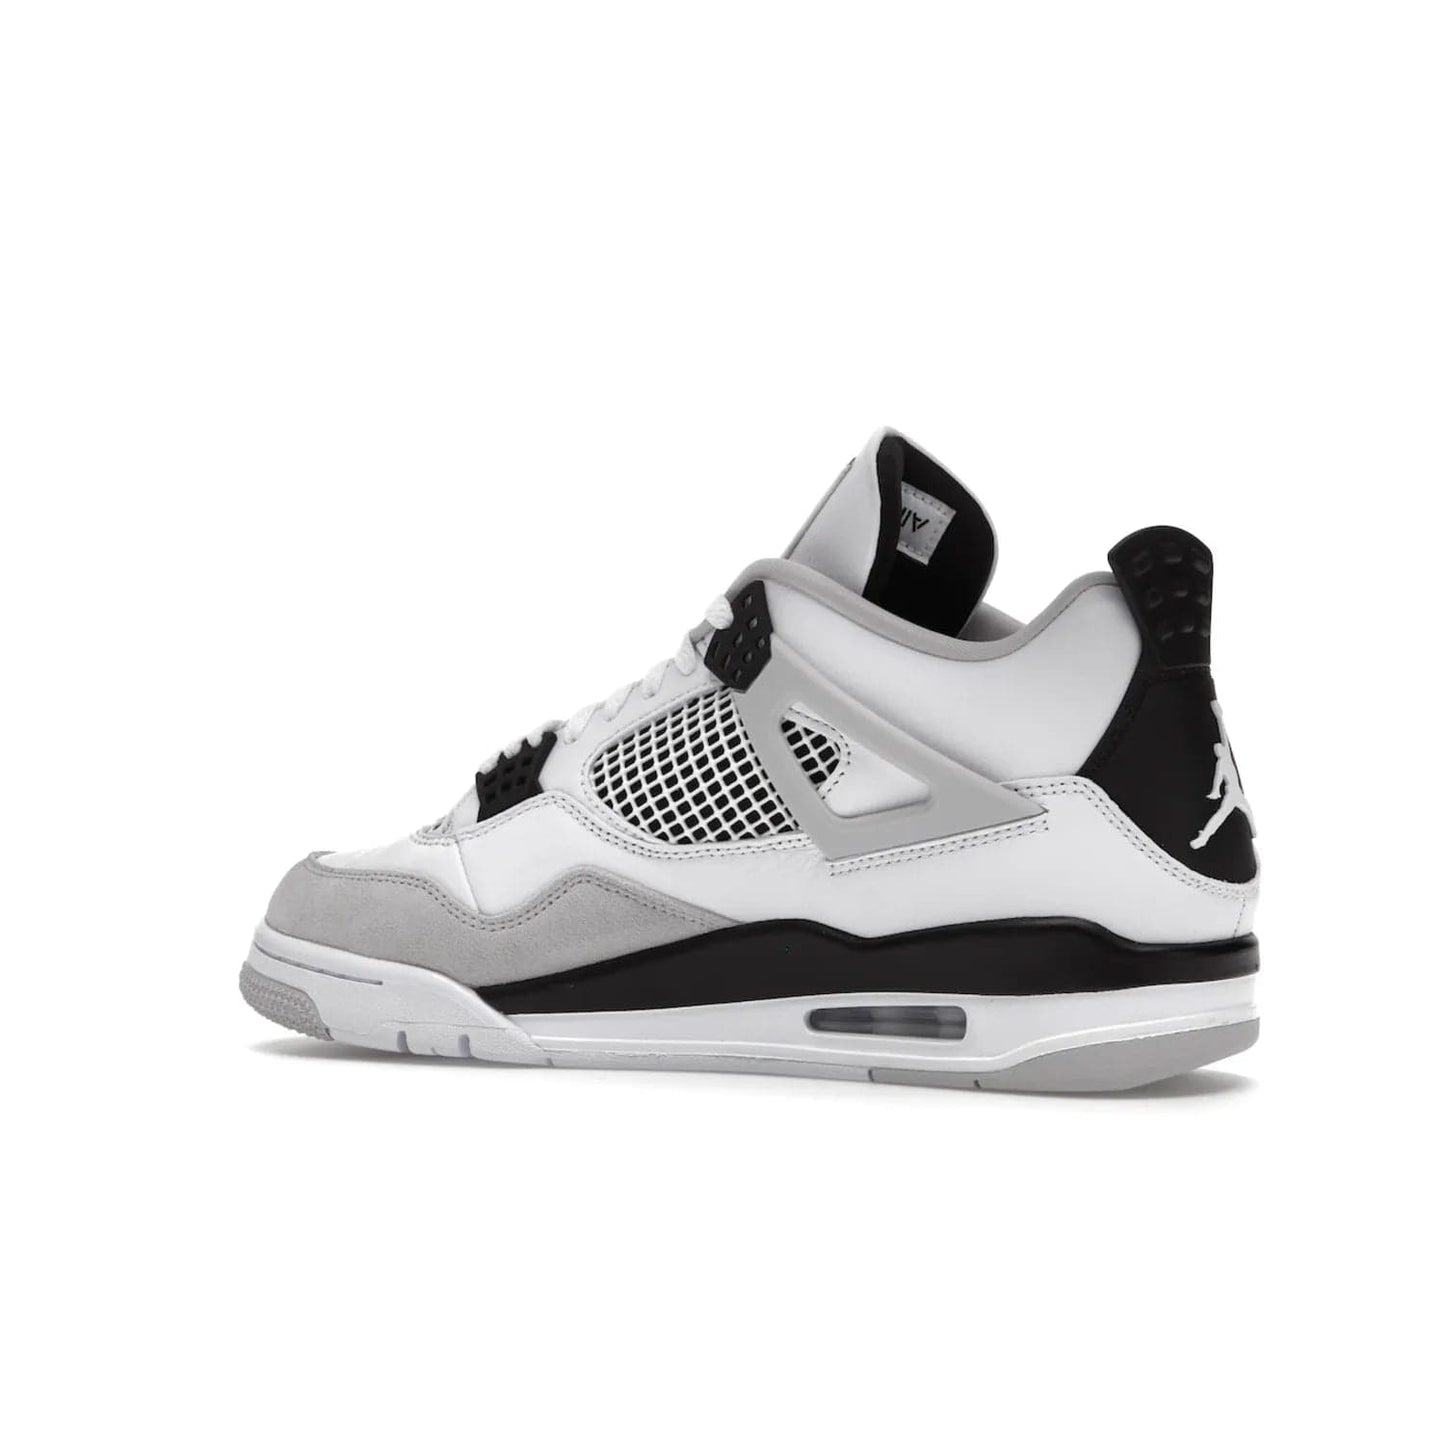 Jordan 4 Retro Military Black - Image 22 - Only at www.BallersClubKickz.com - Updated Air Jordan 4 style with a white/black/light grey sole and visible Air unit. Released in May 2022, offering timeless classic style and comfort.